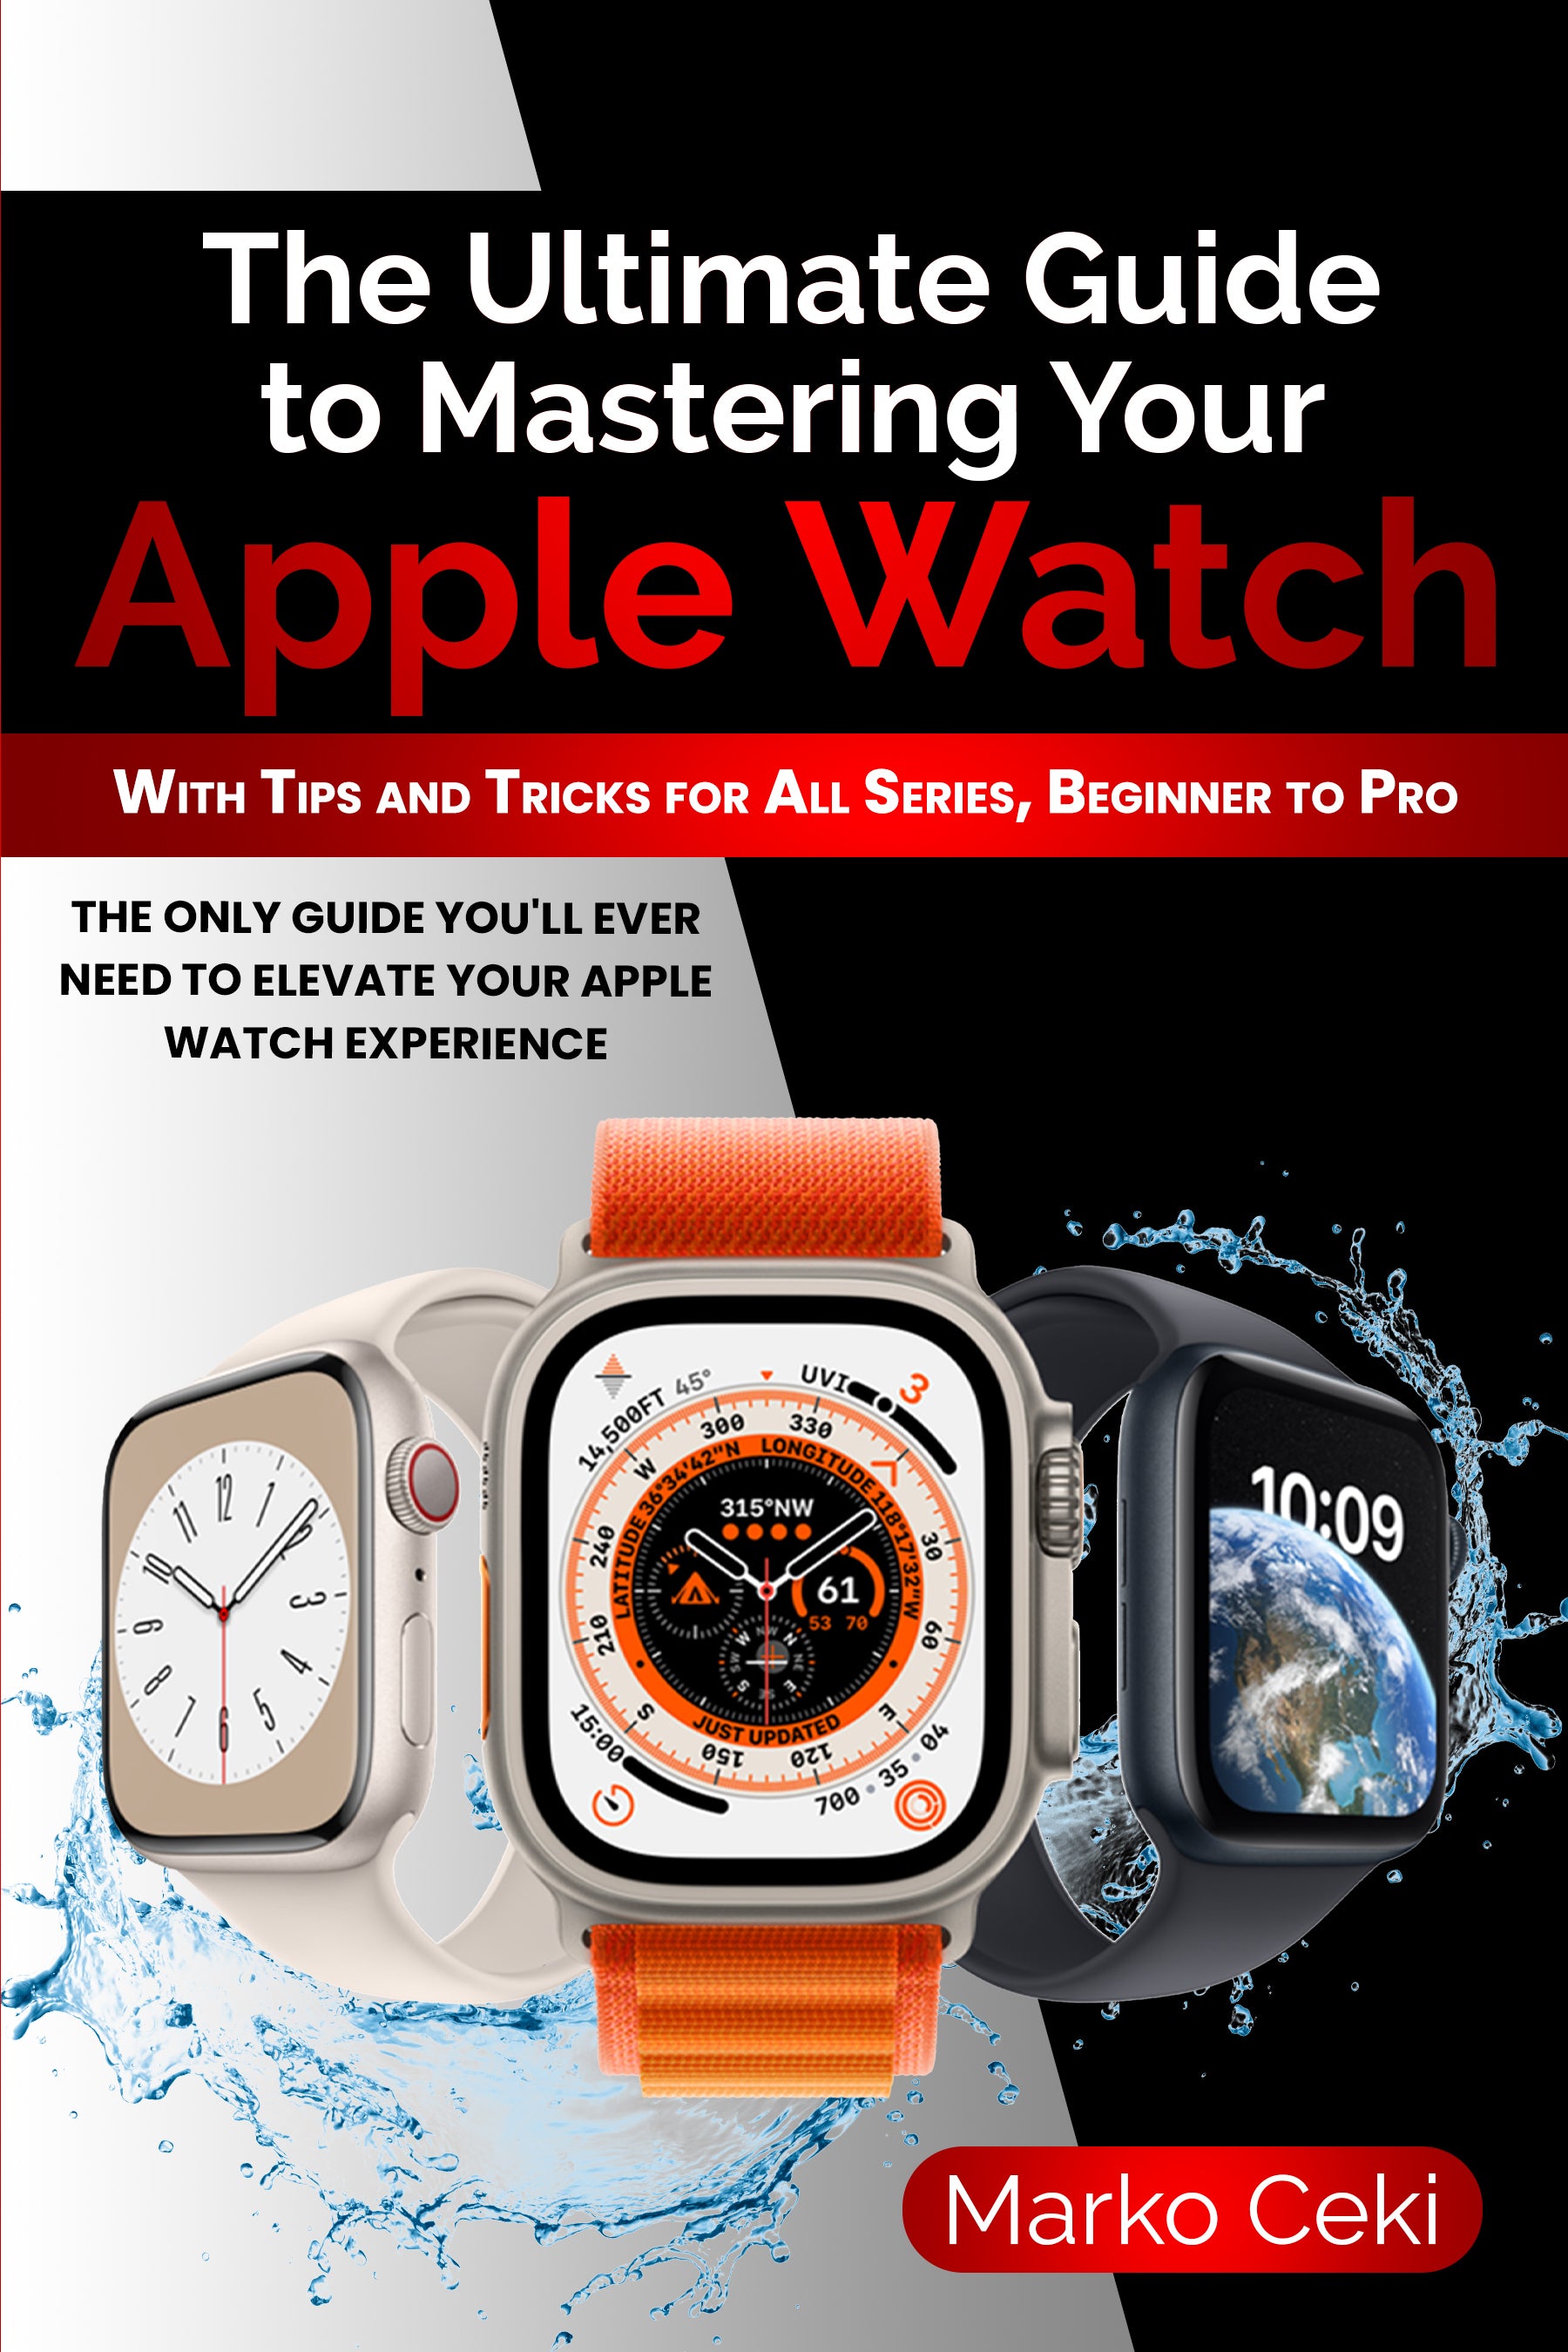 The Ultimate Guide to Mastering Your Apple Watch: With Tips and Tricks for All Series, Beginner to Pro